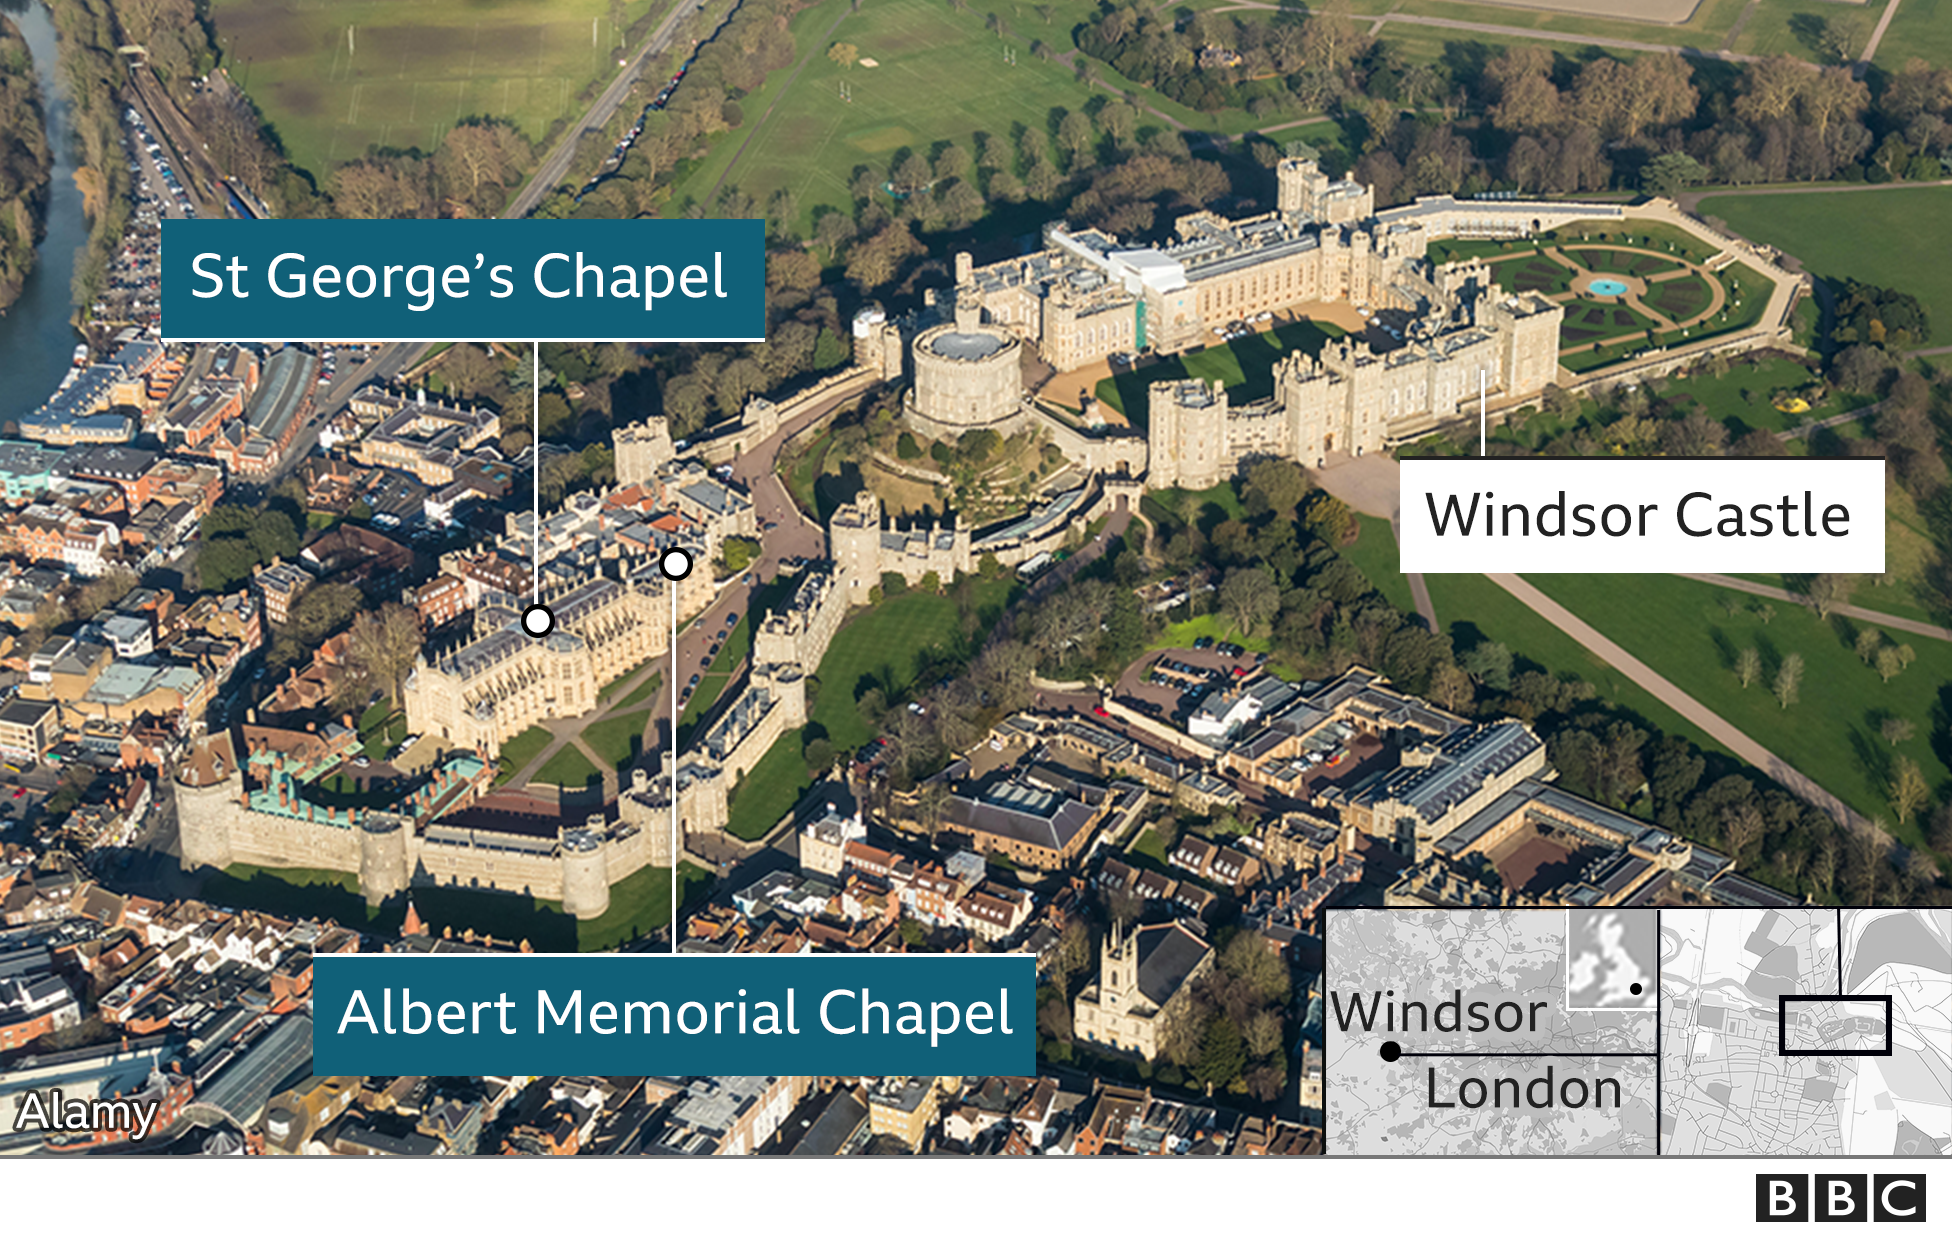 Aerial image of Windsor showing the castle and chapels